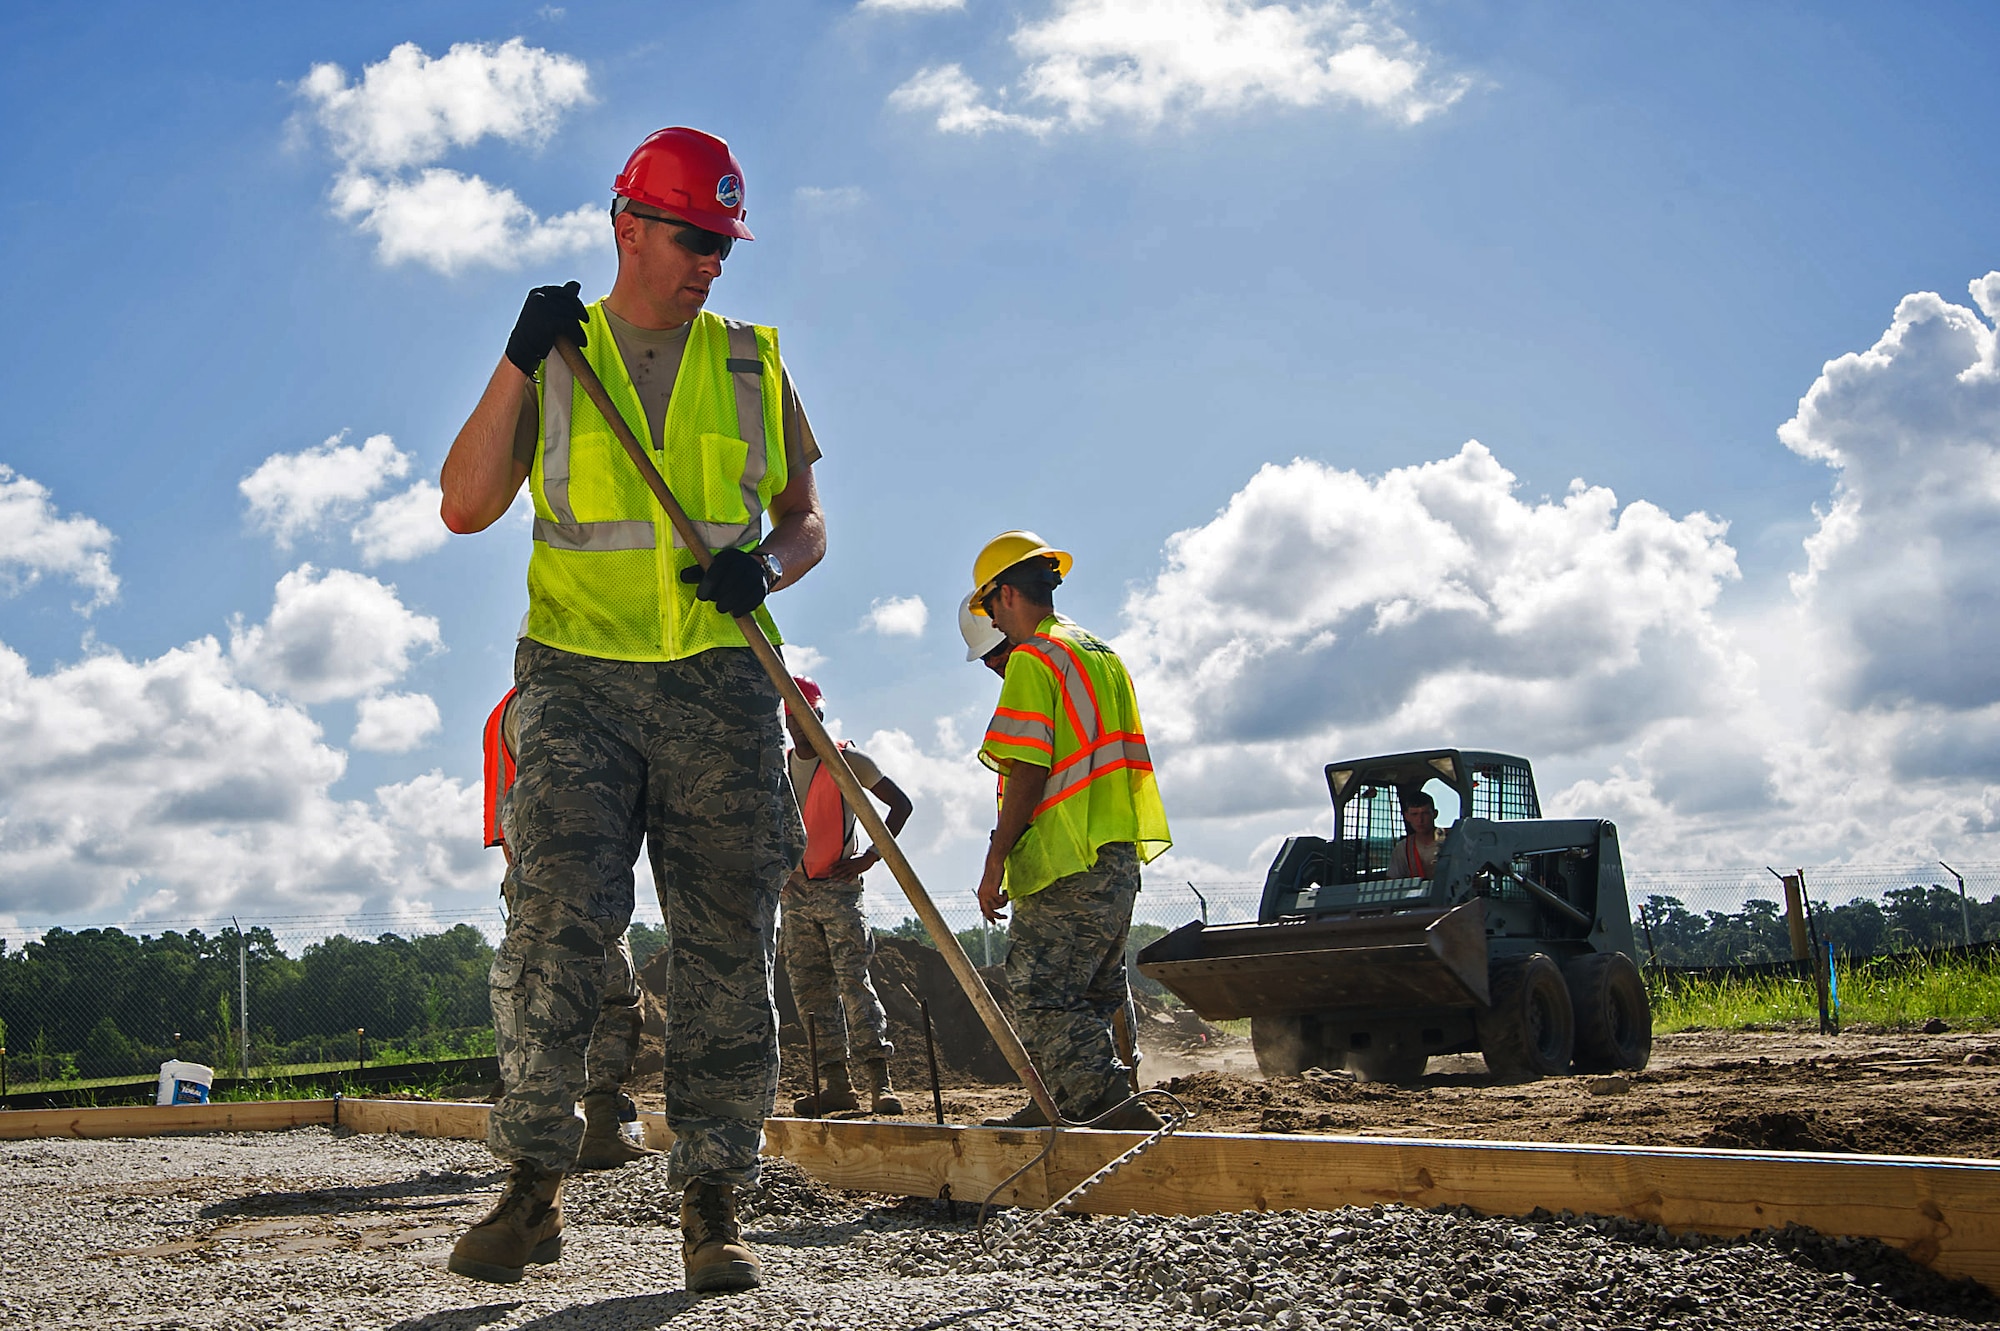 Maj. Matthew Gill, 560th RED HORSE Squadron director of operations, joins his fellow RED HORSE Airmen as they prepare the ground for cement aprons outside the new building they are constructing at Joint Base Charleston. Members of the 560th RHS and the 628th Civil Engineer Squadron at Joint Base Charleston, Sout Carolina and the 555th RHS from Nellis Air Force Base, Nevada, and the 567th RHS from Seymour Johnson Air Force Base, North Carolina joined forces at Joint Base Charleston to build a 4,800 square-foot preengineered  building building to store construction equipment and gear.  Rapid Engineer Deployable, Heavy Operational Repair Squadron, Engineer (RED HORSE) squadrons provide the Air Force with a highly mobile civil engineering capability in support of contingency and special operations worldwide. They are self-sufficient, mobile squadrons that provide heavy construction support such as runway/facility construction, electrical upgrades, and equipment transport when requirements exceed normal base civil engineer capabilities and where Army engineer support is not readily available. (U.S. Air Force Photo by Master Sgt. Shane Ellis)